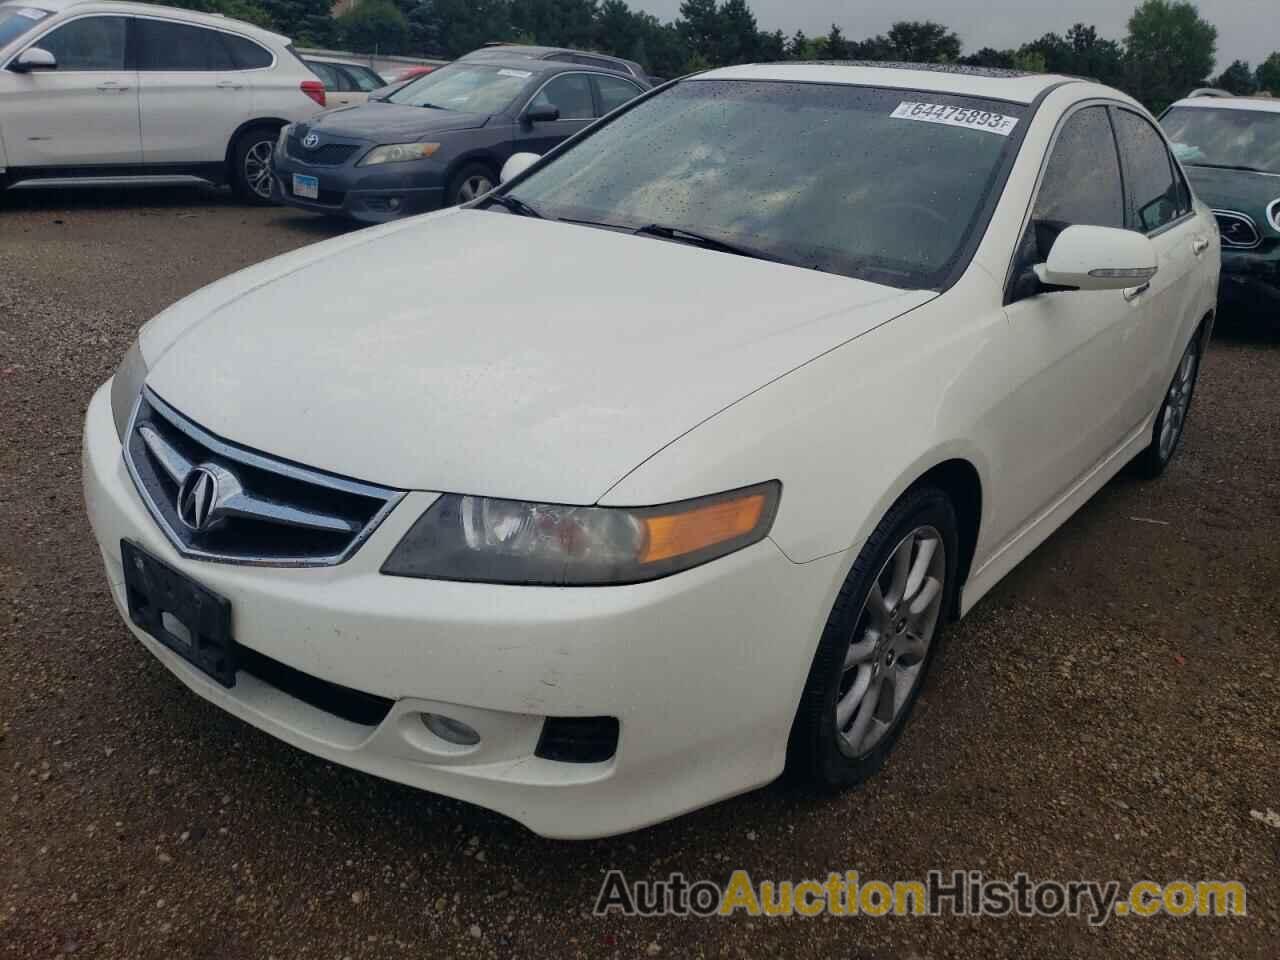 2008 ACURA TSX, JH4CL96948C017360